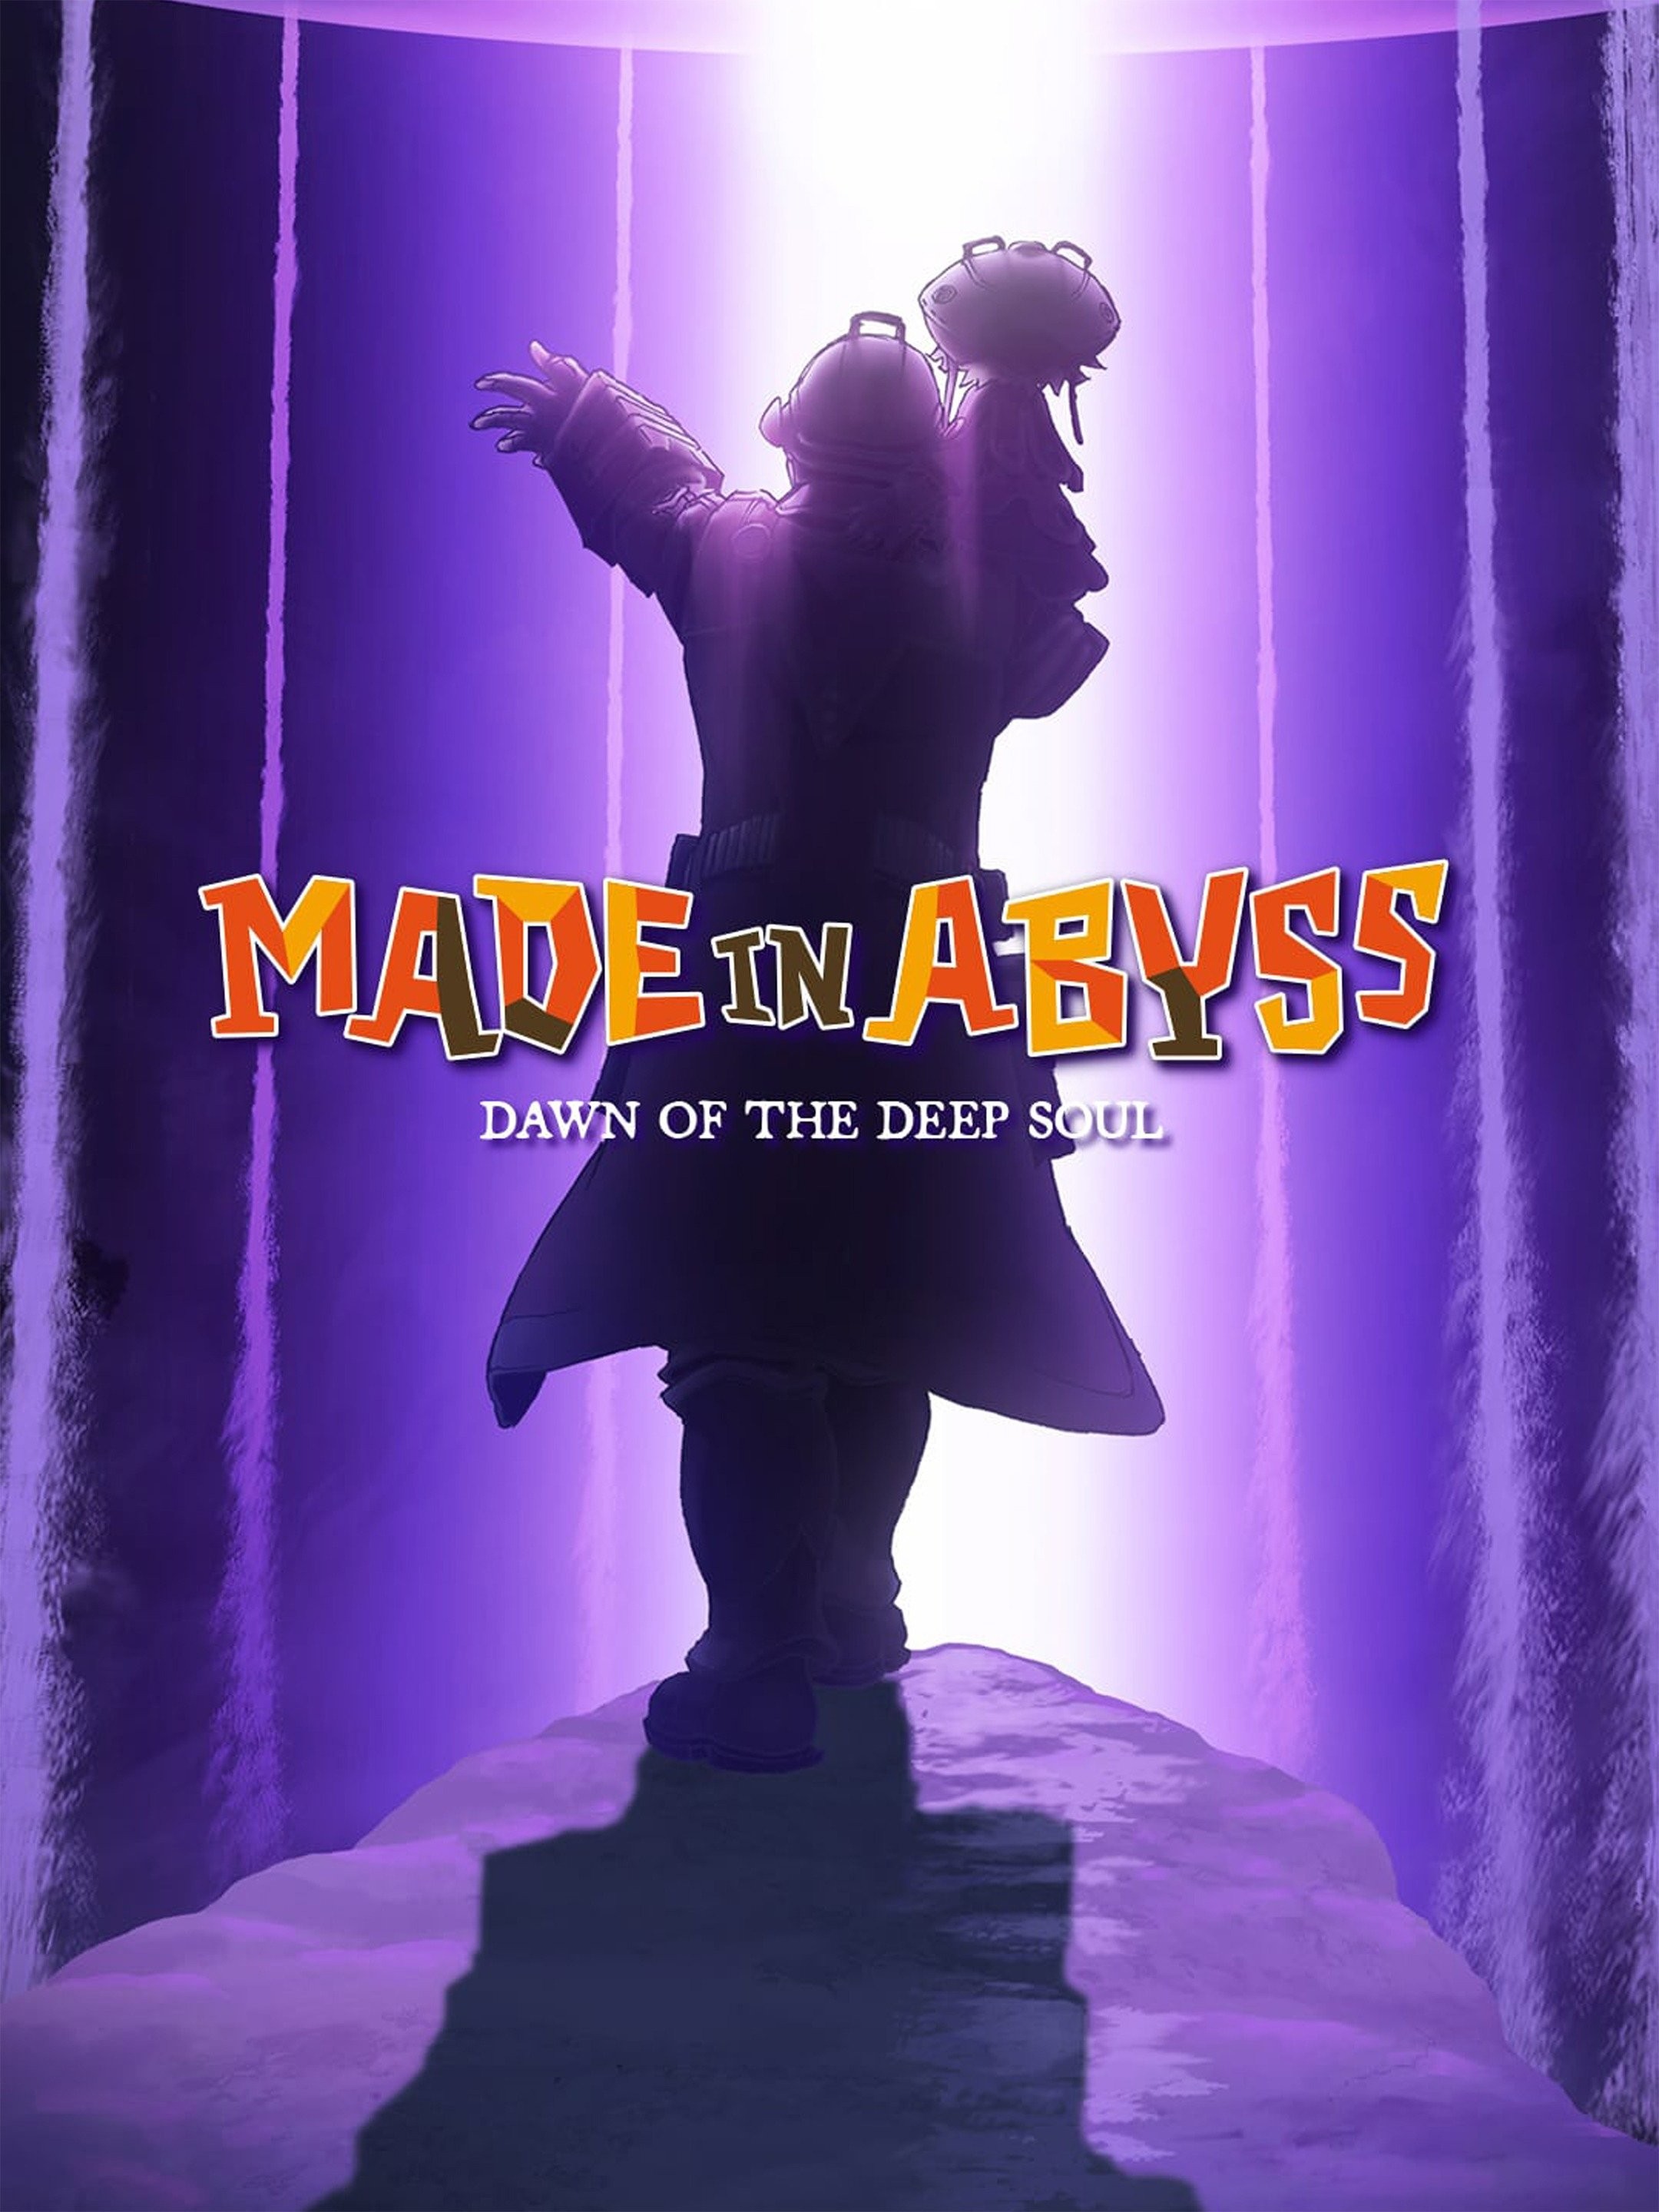 Made in Abyss: Dawn of the Deep Soul - Rotten Tomatoes